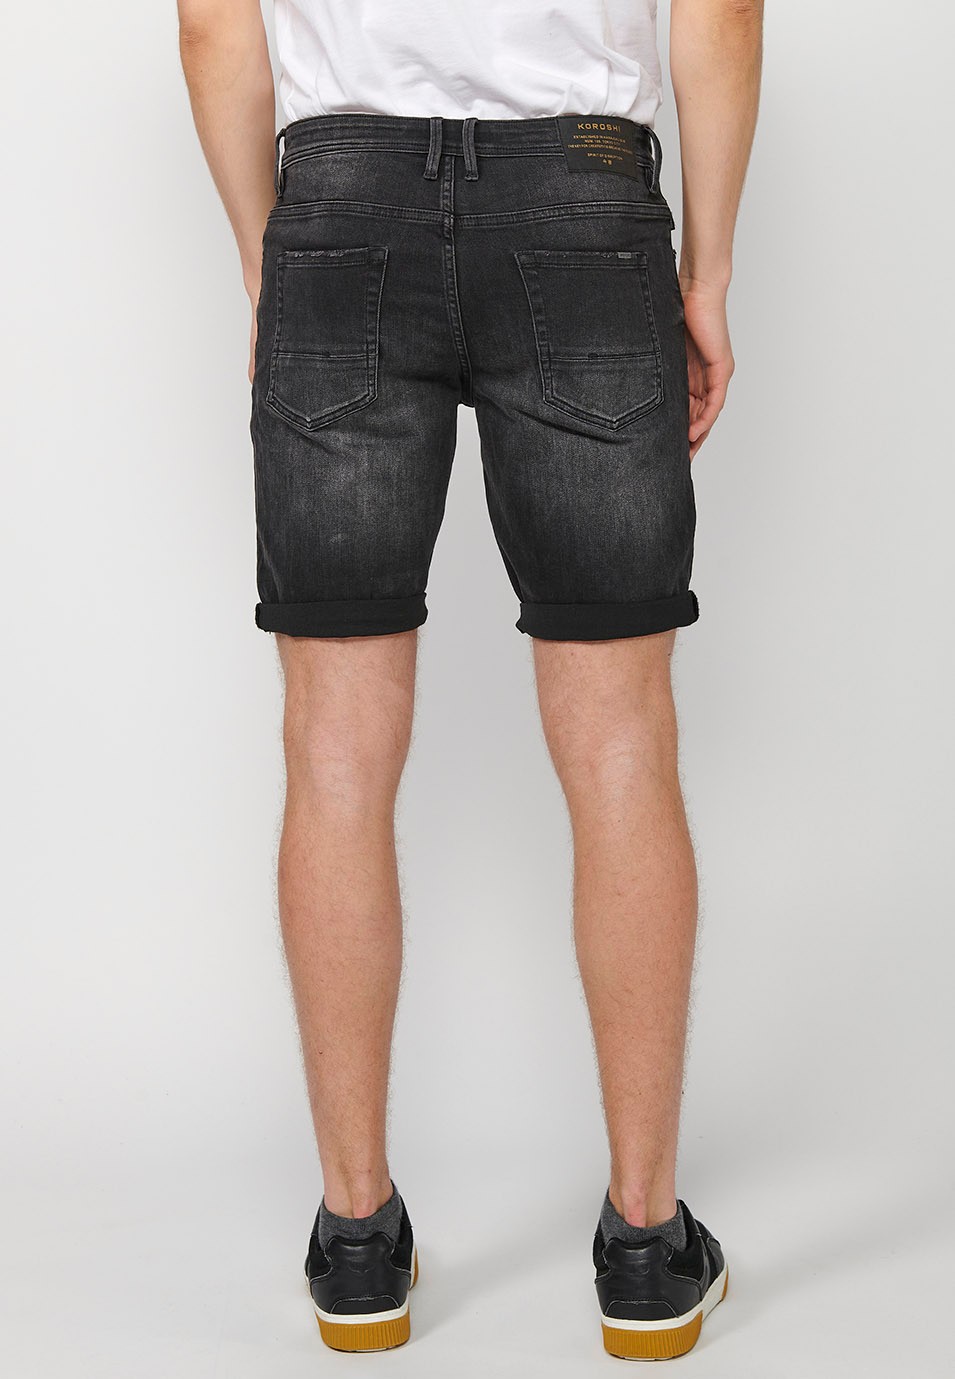 Black Denim Bermuda Shorts with Turn-Up Finish and Front Zipper and Button Closure for Men 4